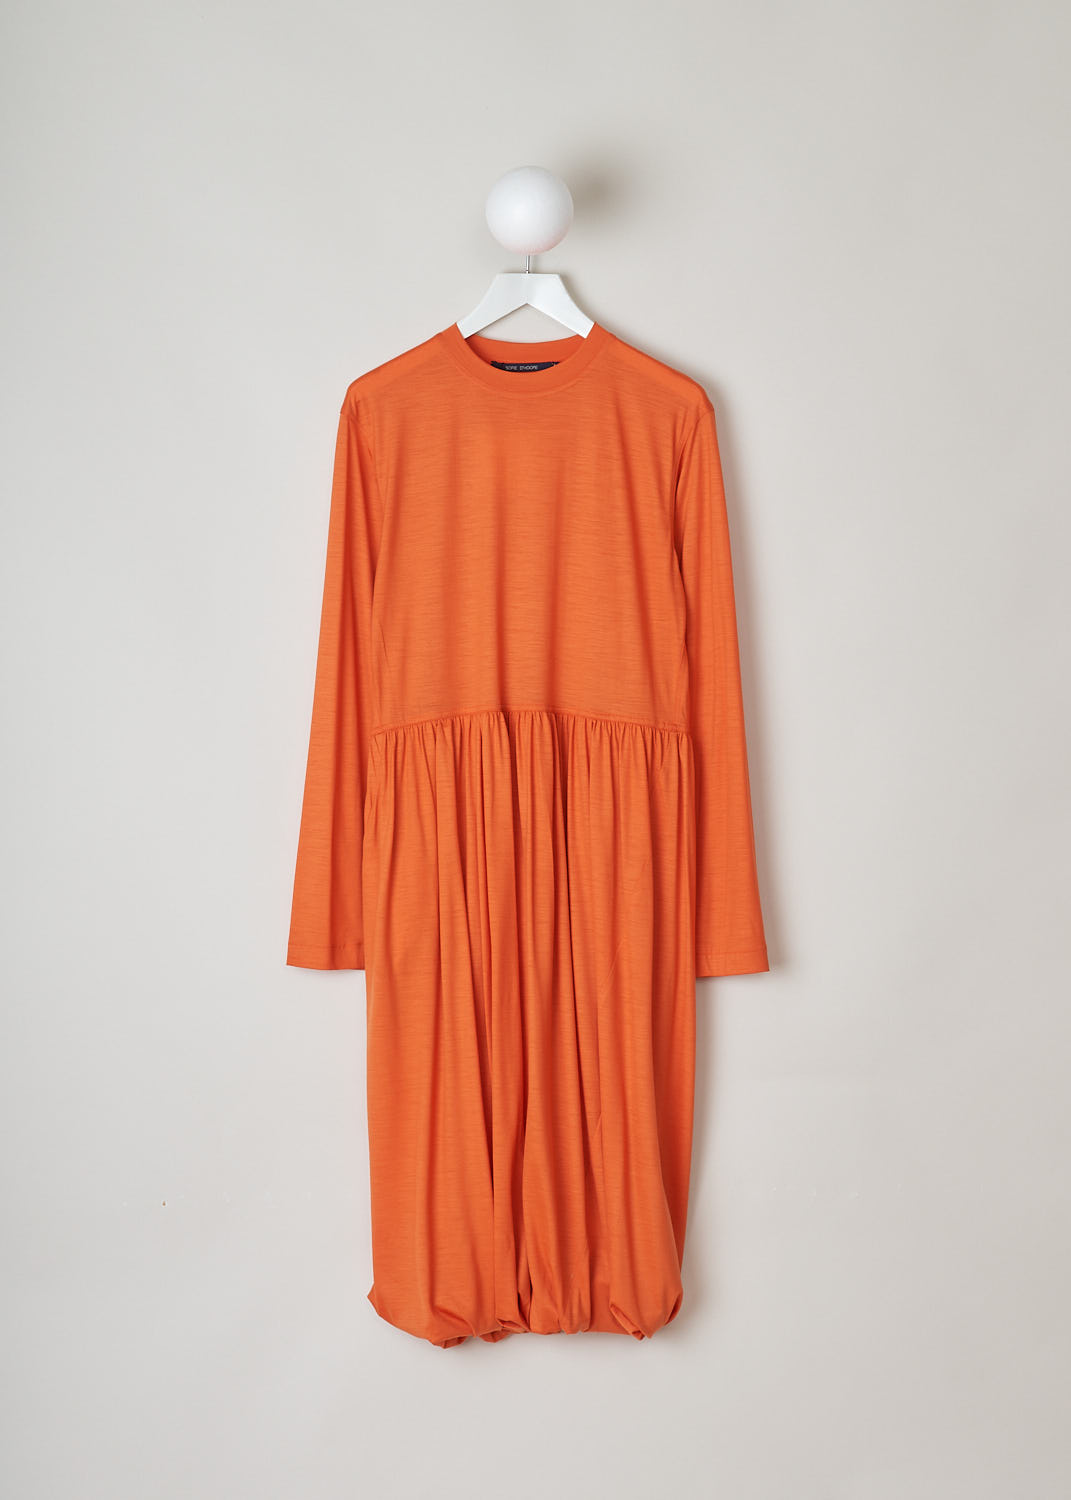 SOFIE D’HOORE, ORANGE LONG SLEEVE DRESS, DEMURE_WOJE_PAPAYA, Orange, Front, This orange mid-length dress features a round neckline, a plain long sleeve bodice and a twisted balloon skirt. A single side pocket can be found concealed in the seam. 
